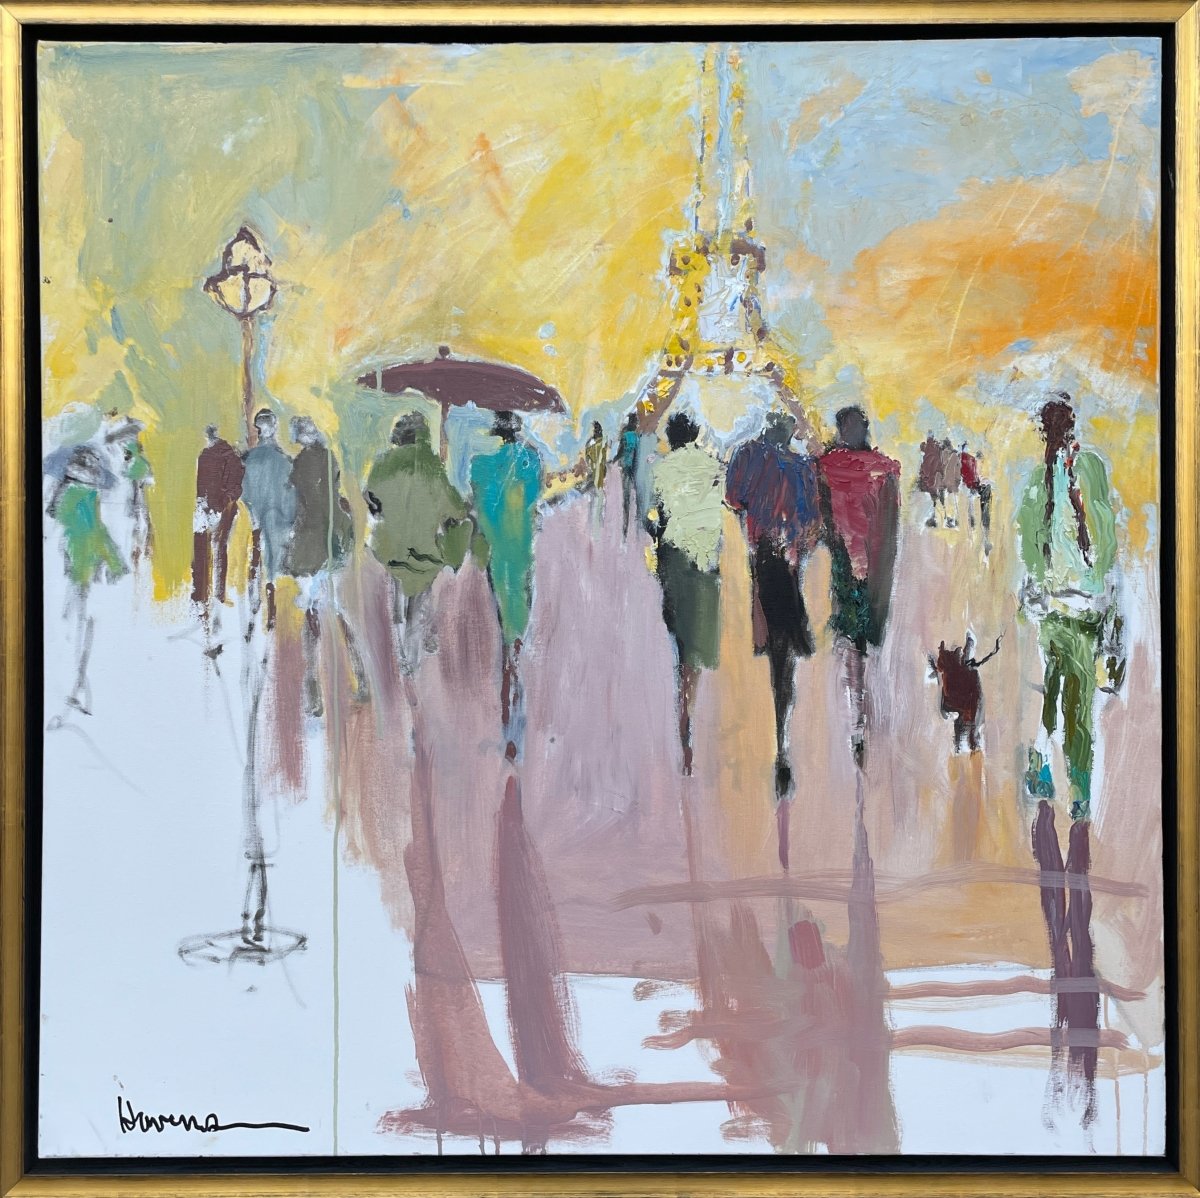 New Year’s Eve by Betsy Havens at LePrince Galleries